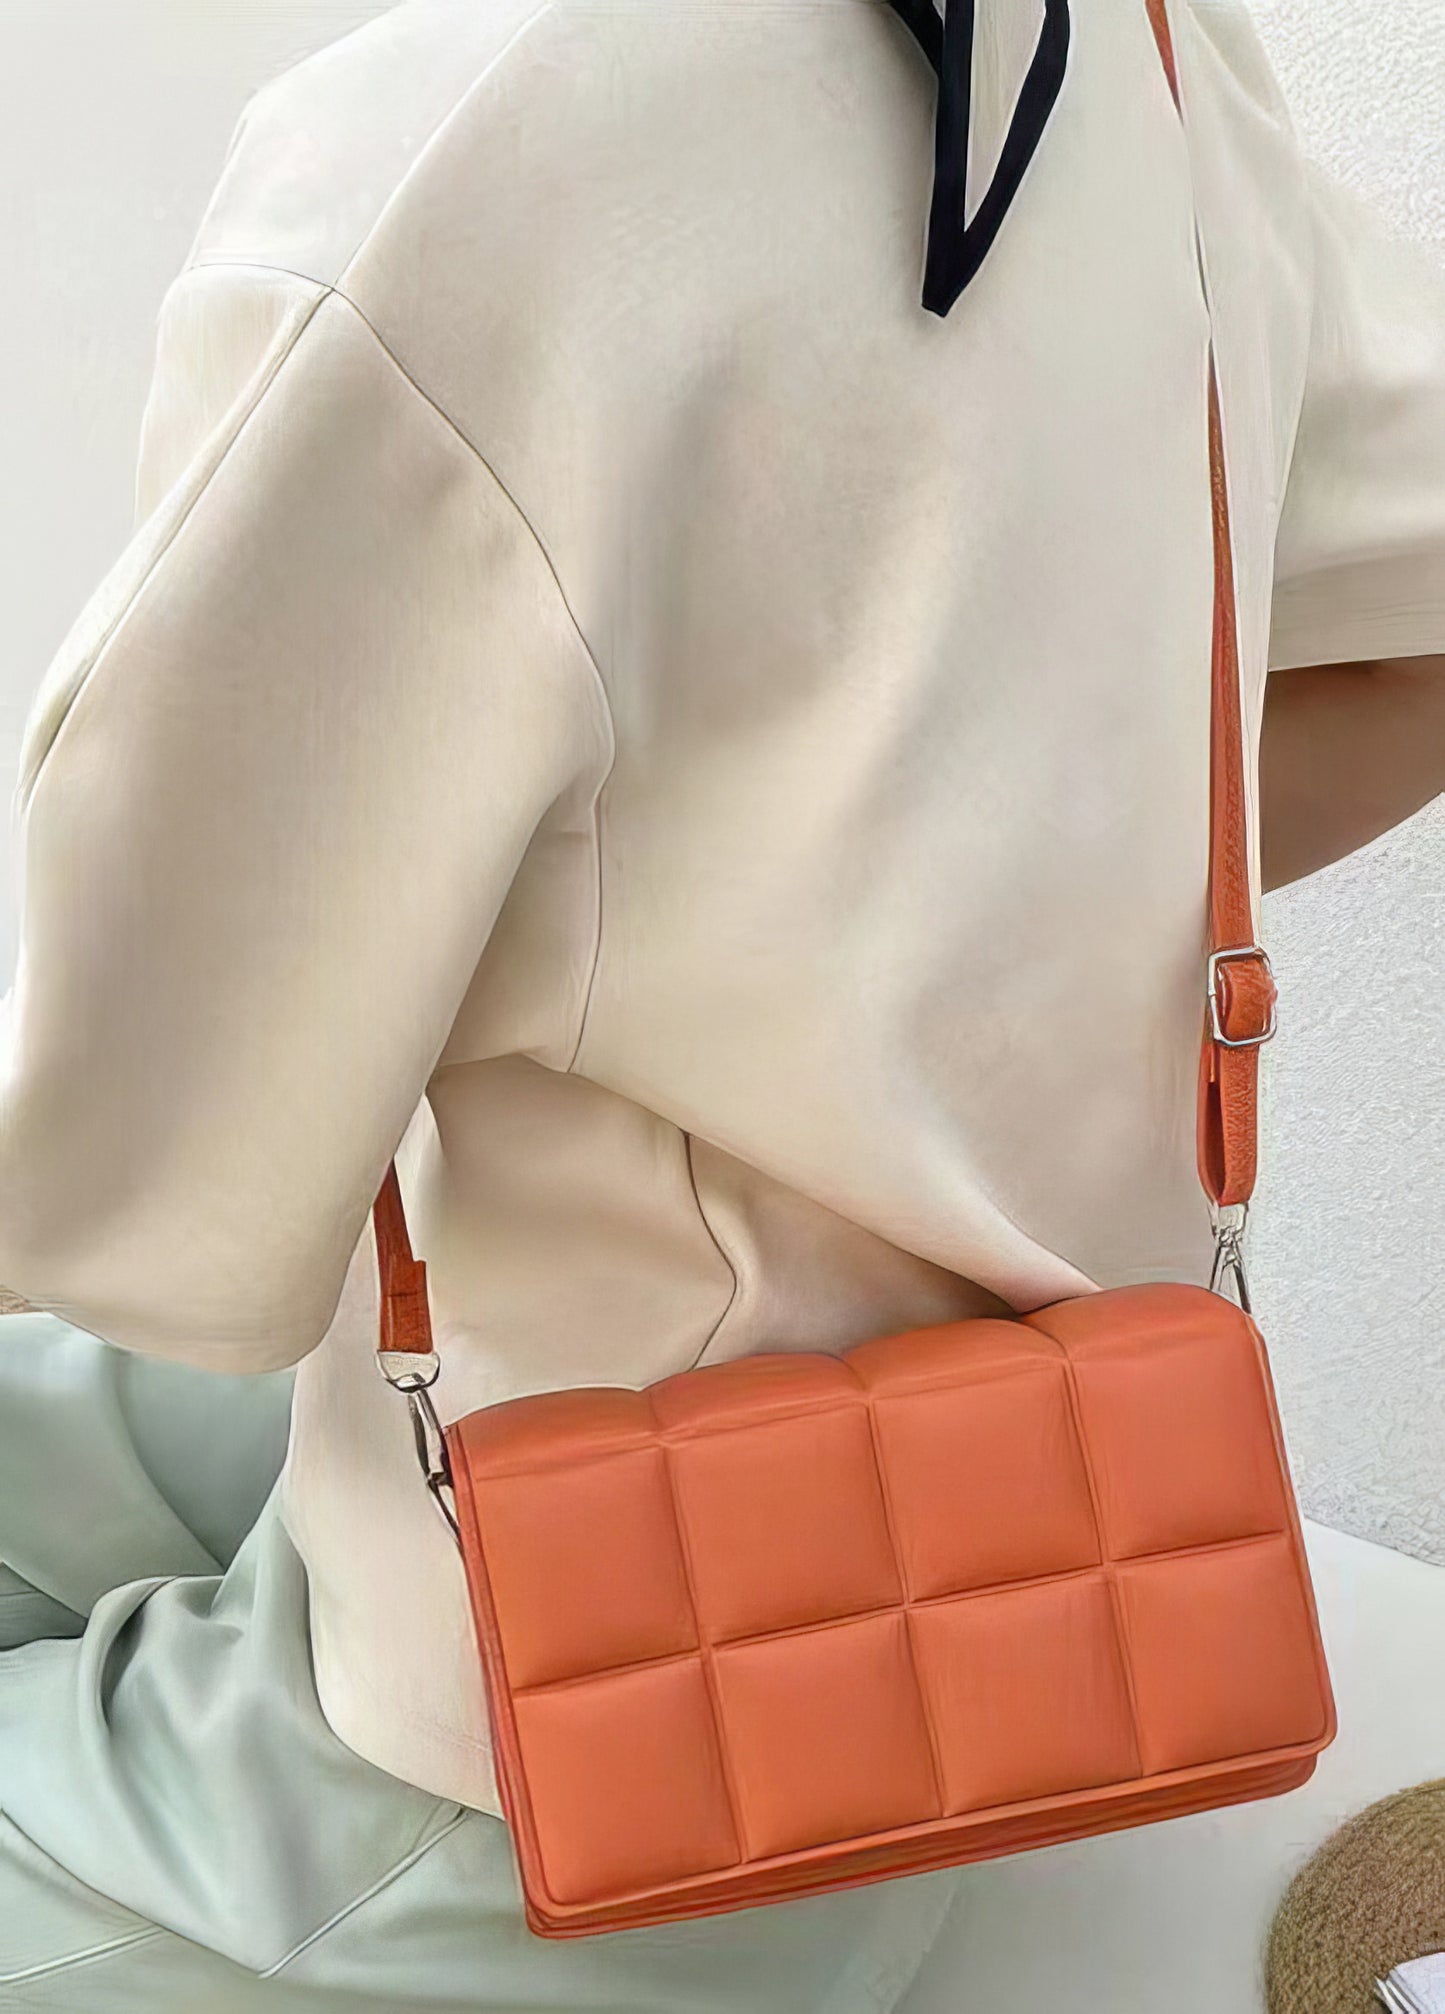 Exquisite Pleated Padded Shoulder Cross-Body Flip Snap Closure Bag with Leather Strap in Coral Orange